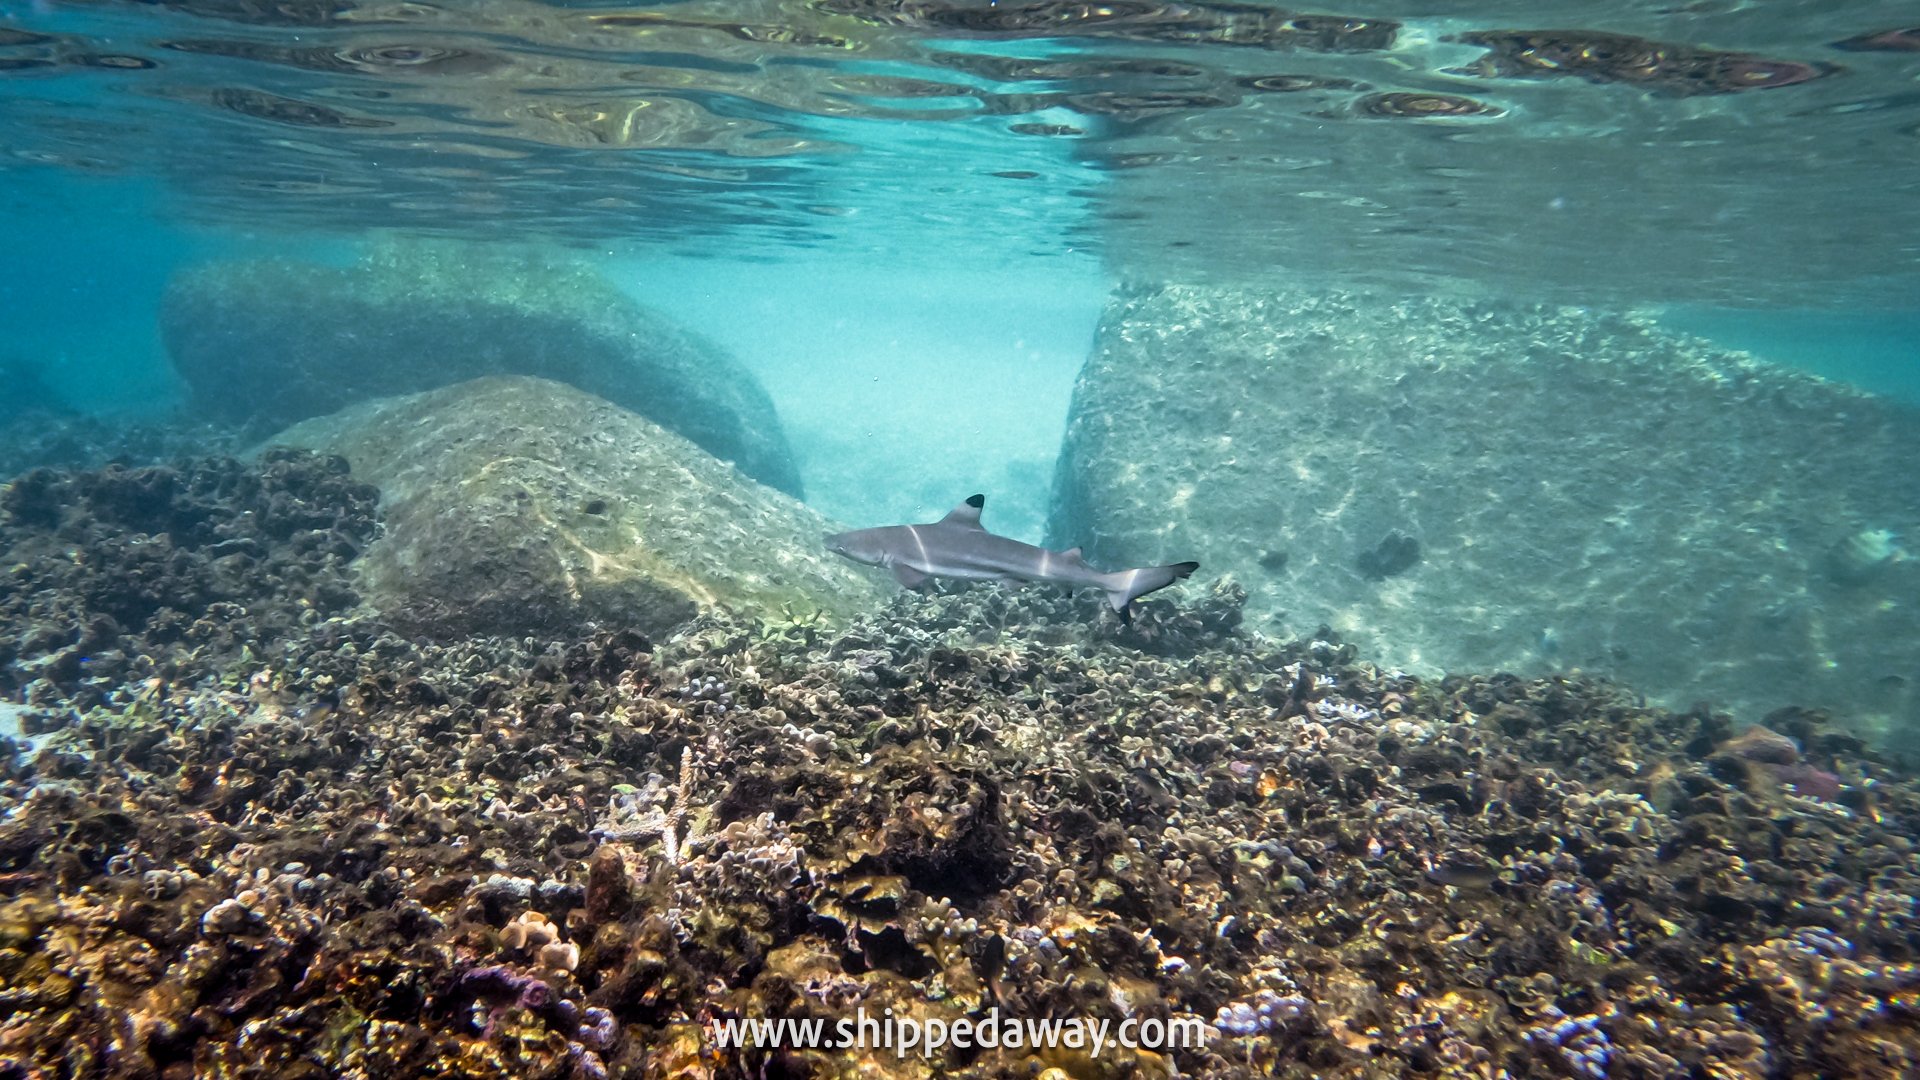 Top Things To Do in Koh Tao, Thailand - Snorkeling with black tip reef sharks, Koh Nang Yuan island